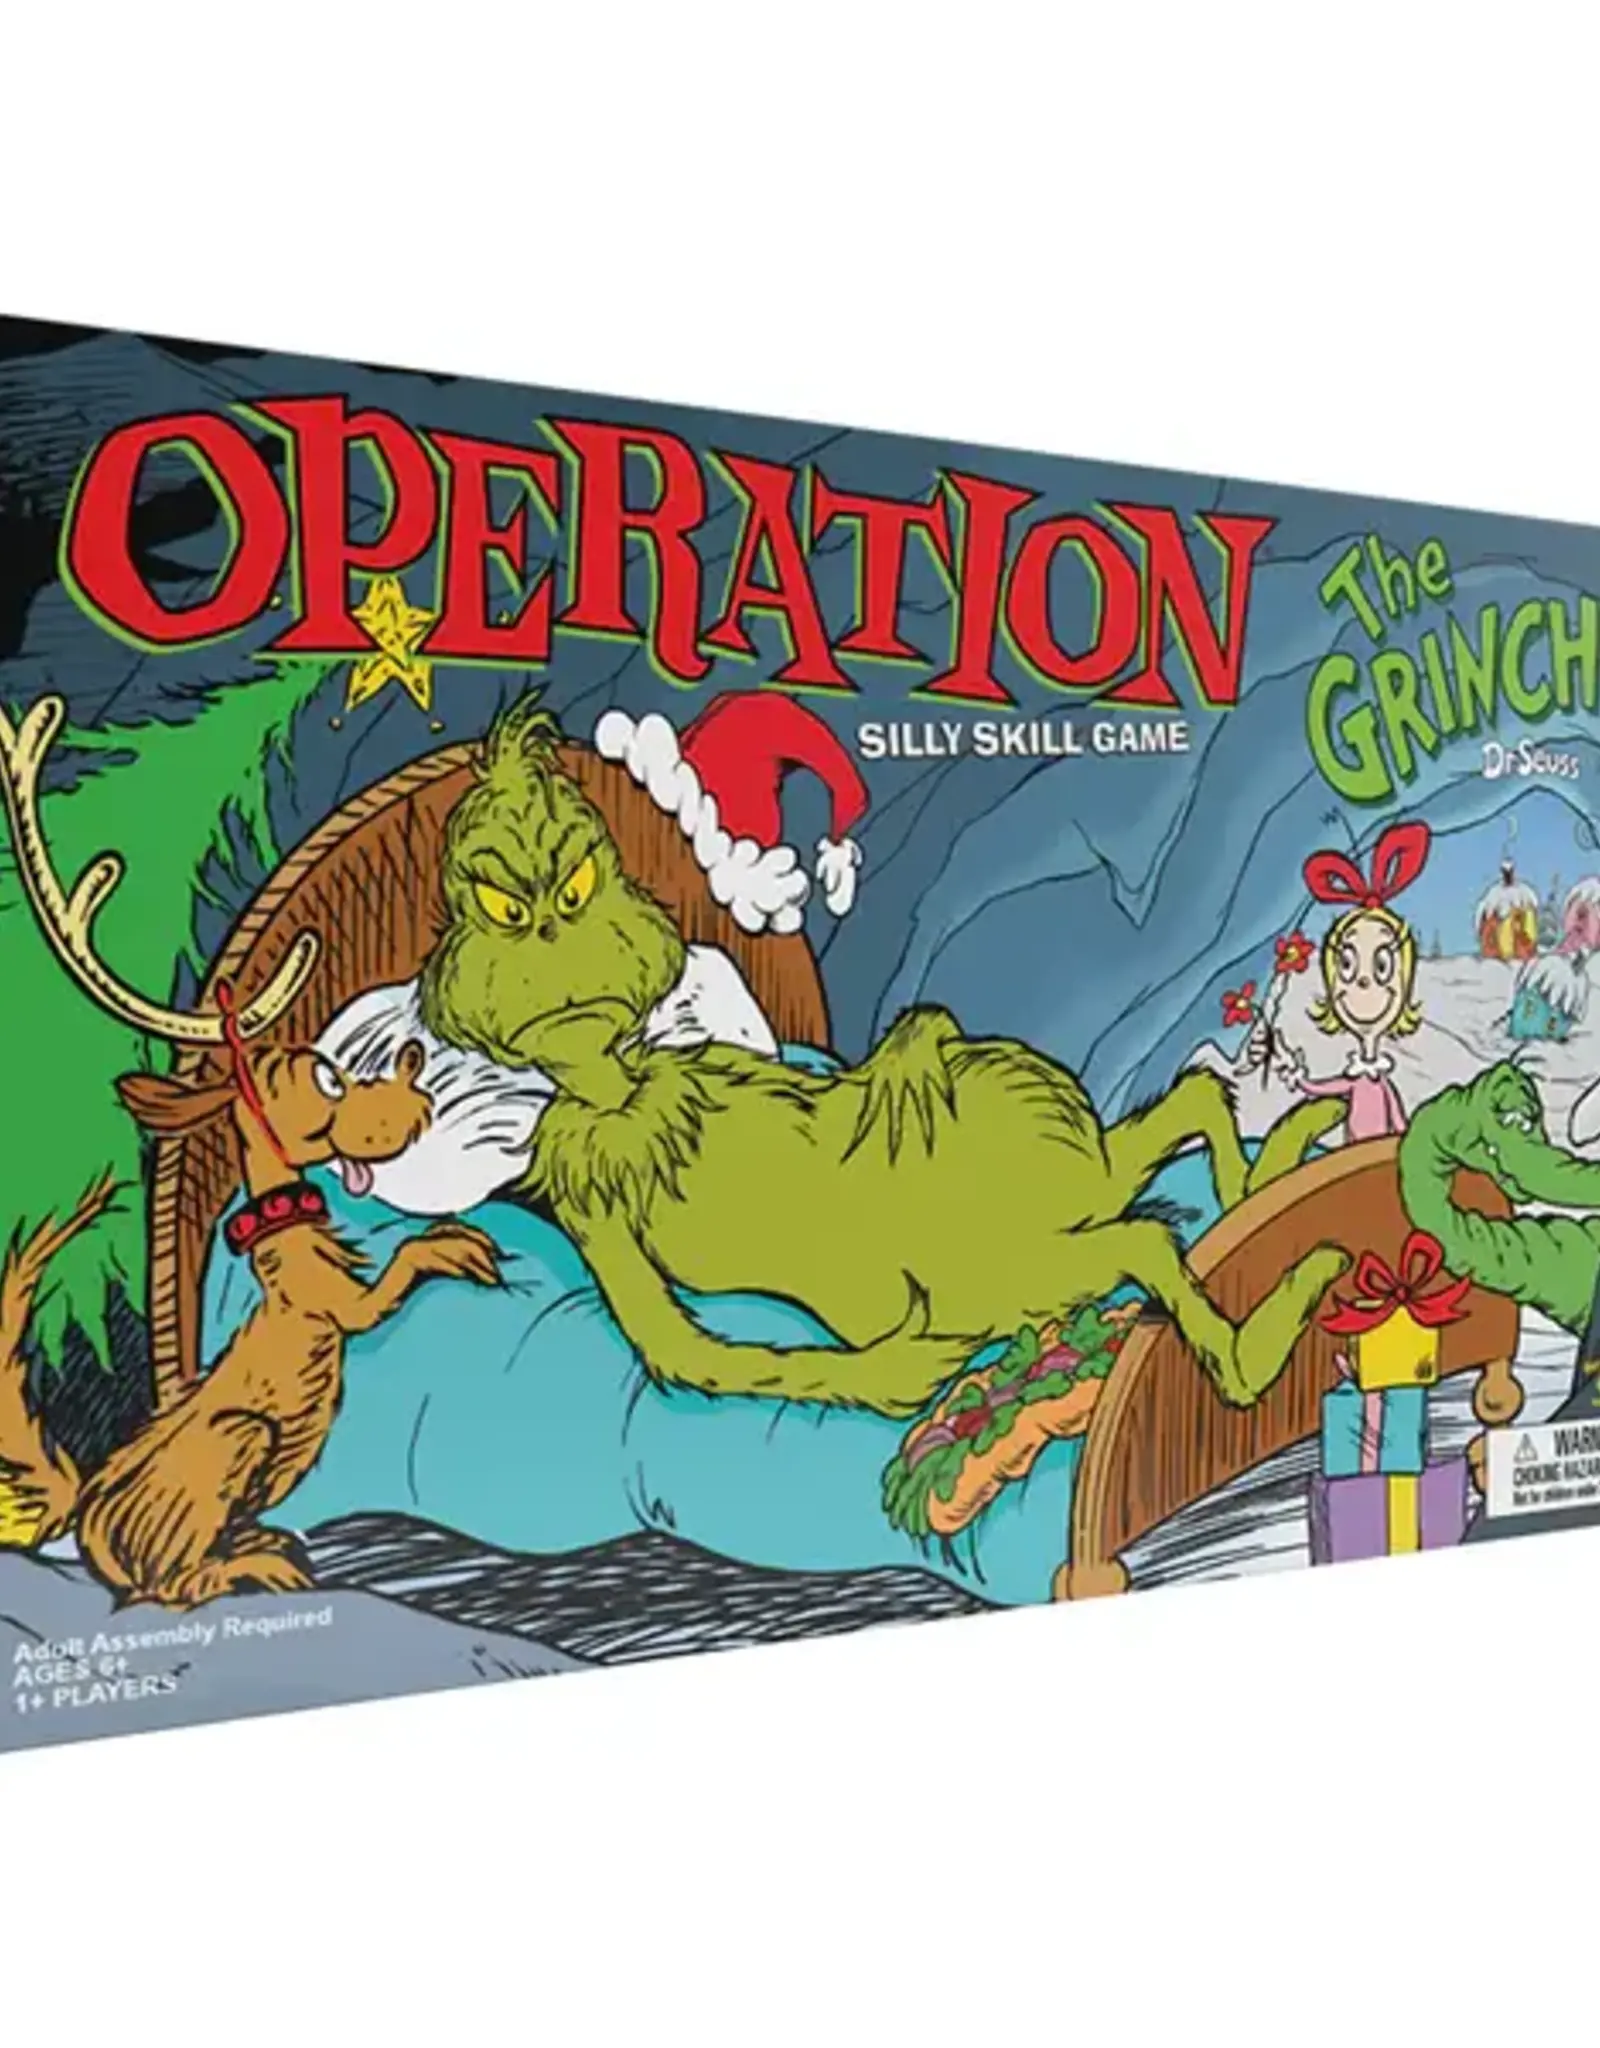 The Grinch Operation